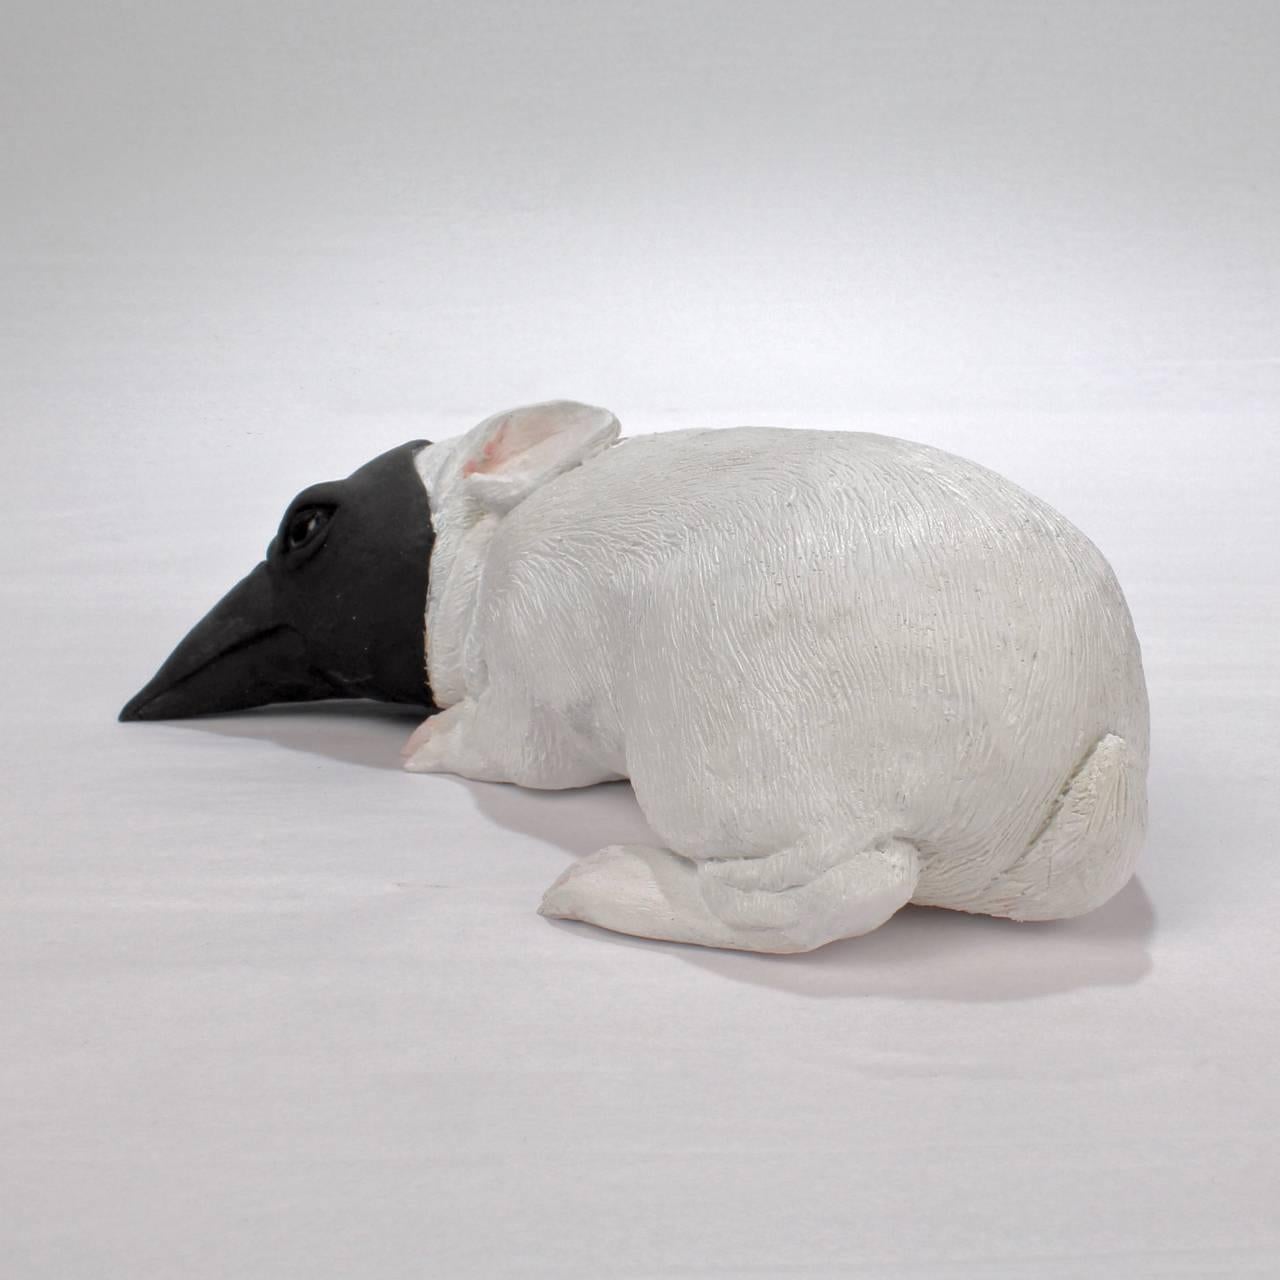 Modern Darla Jackson Baby Bunny with Crow's Mask White Painted Plaster Sculpture, 2011